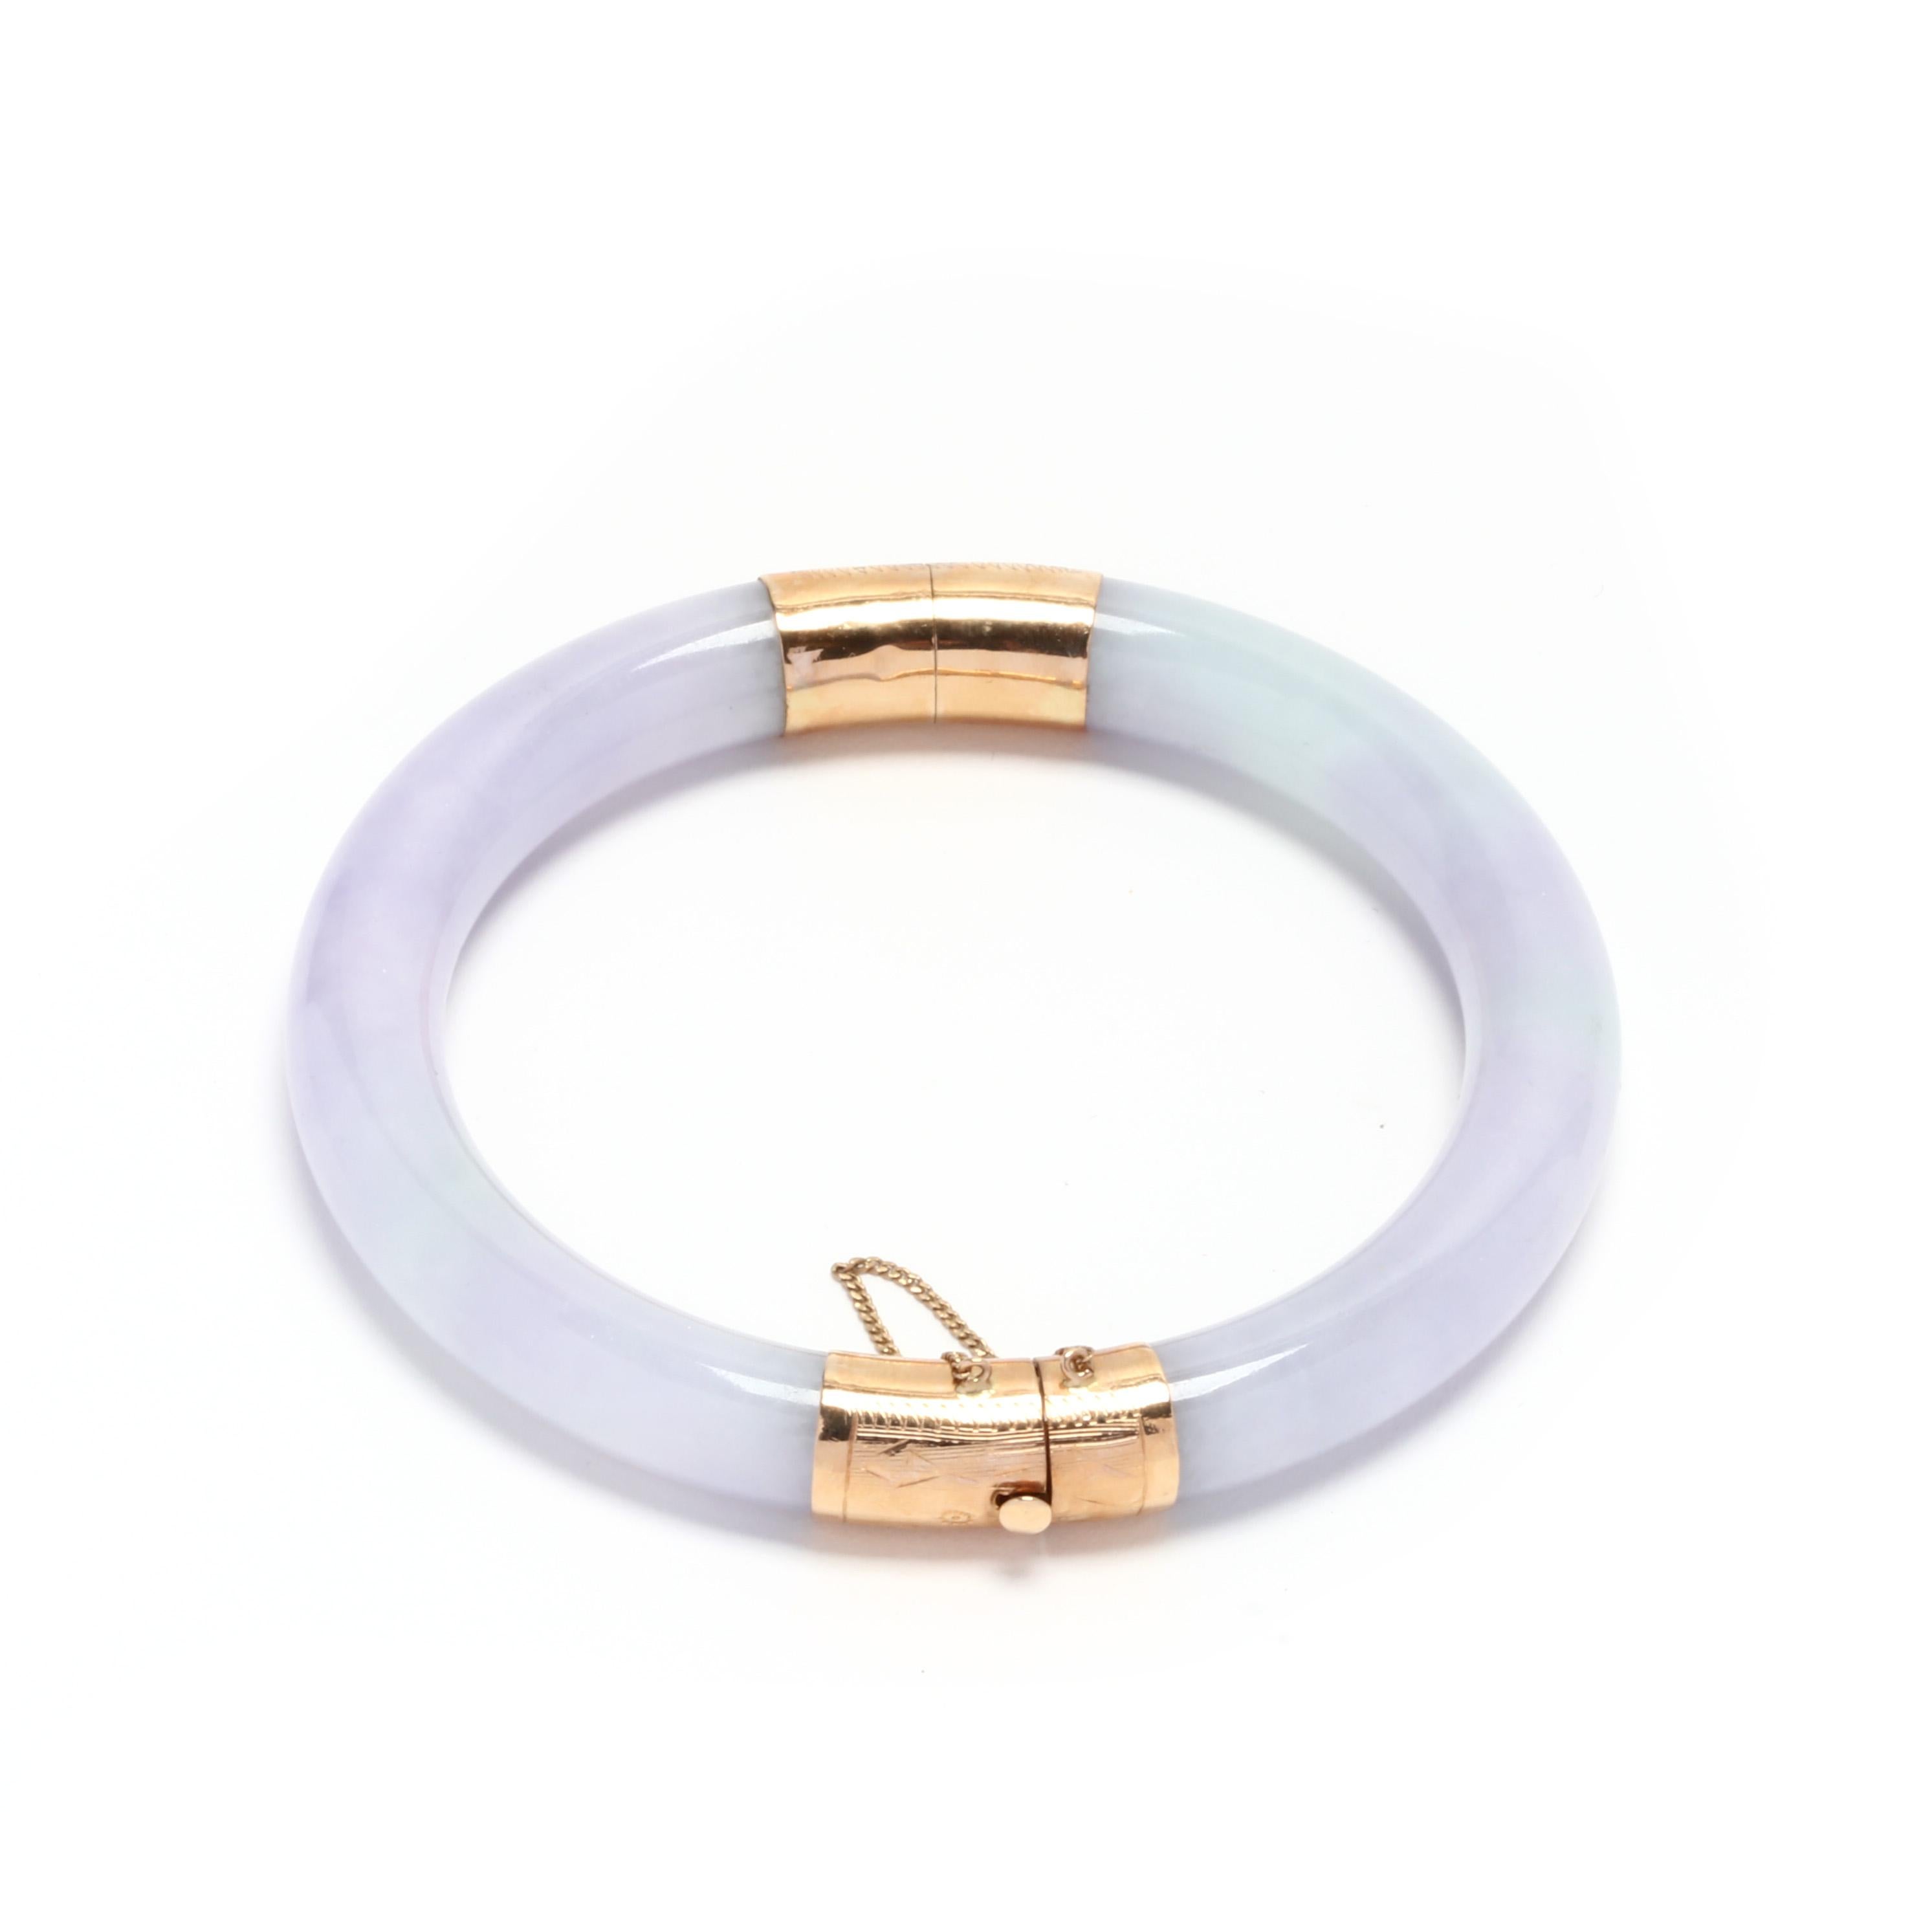 A 14 karat yellow gold lavender jade hinged bangle bracelet. This carved lavender jade bangle has floral engraved gold end caps with a hinge at one end and a clasp at the other.

Length: 7 1/8 in.

Width: 9.25 mm

29.78 dwts.

* Please note that